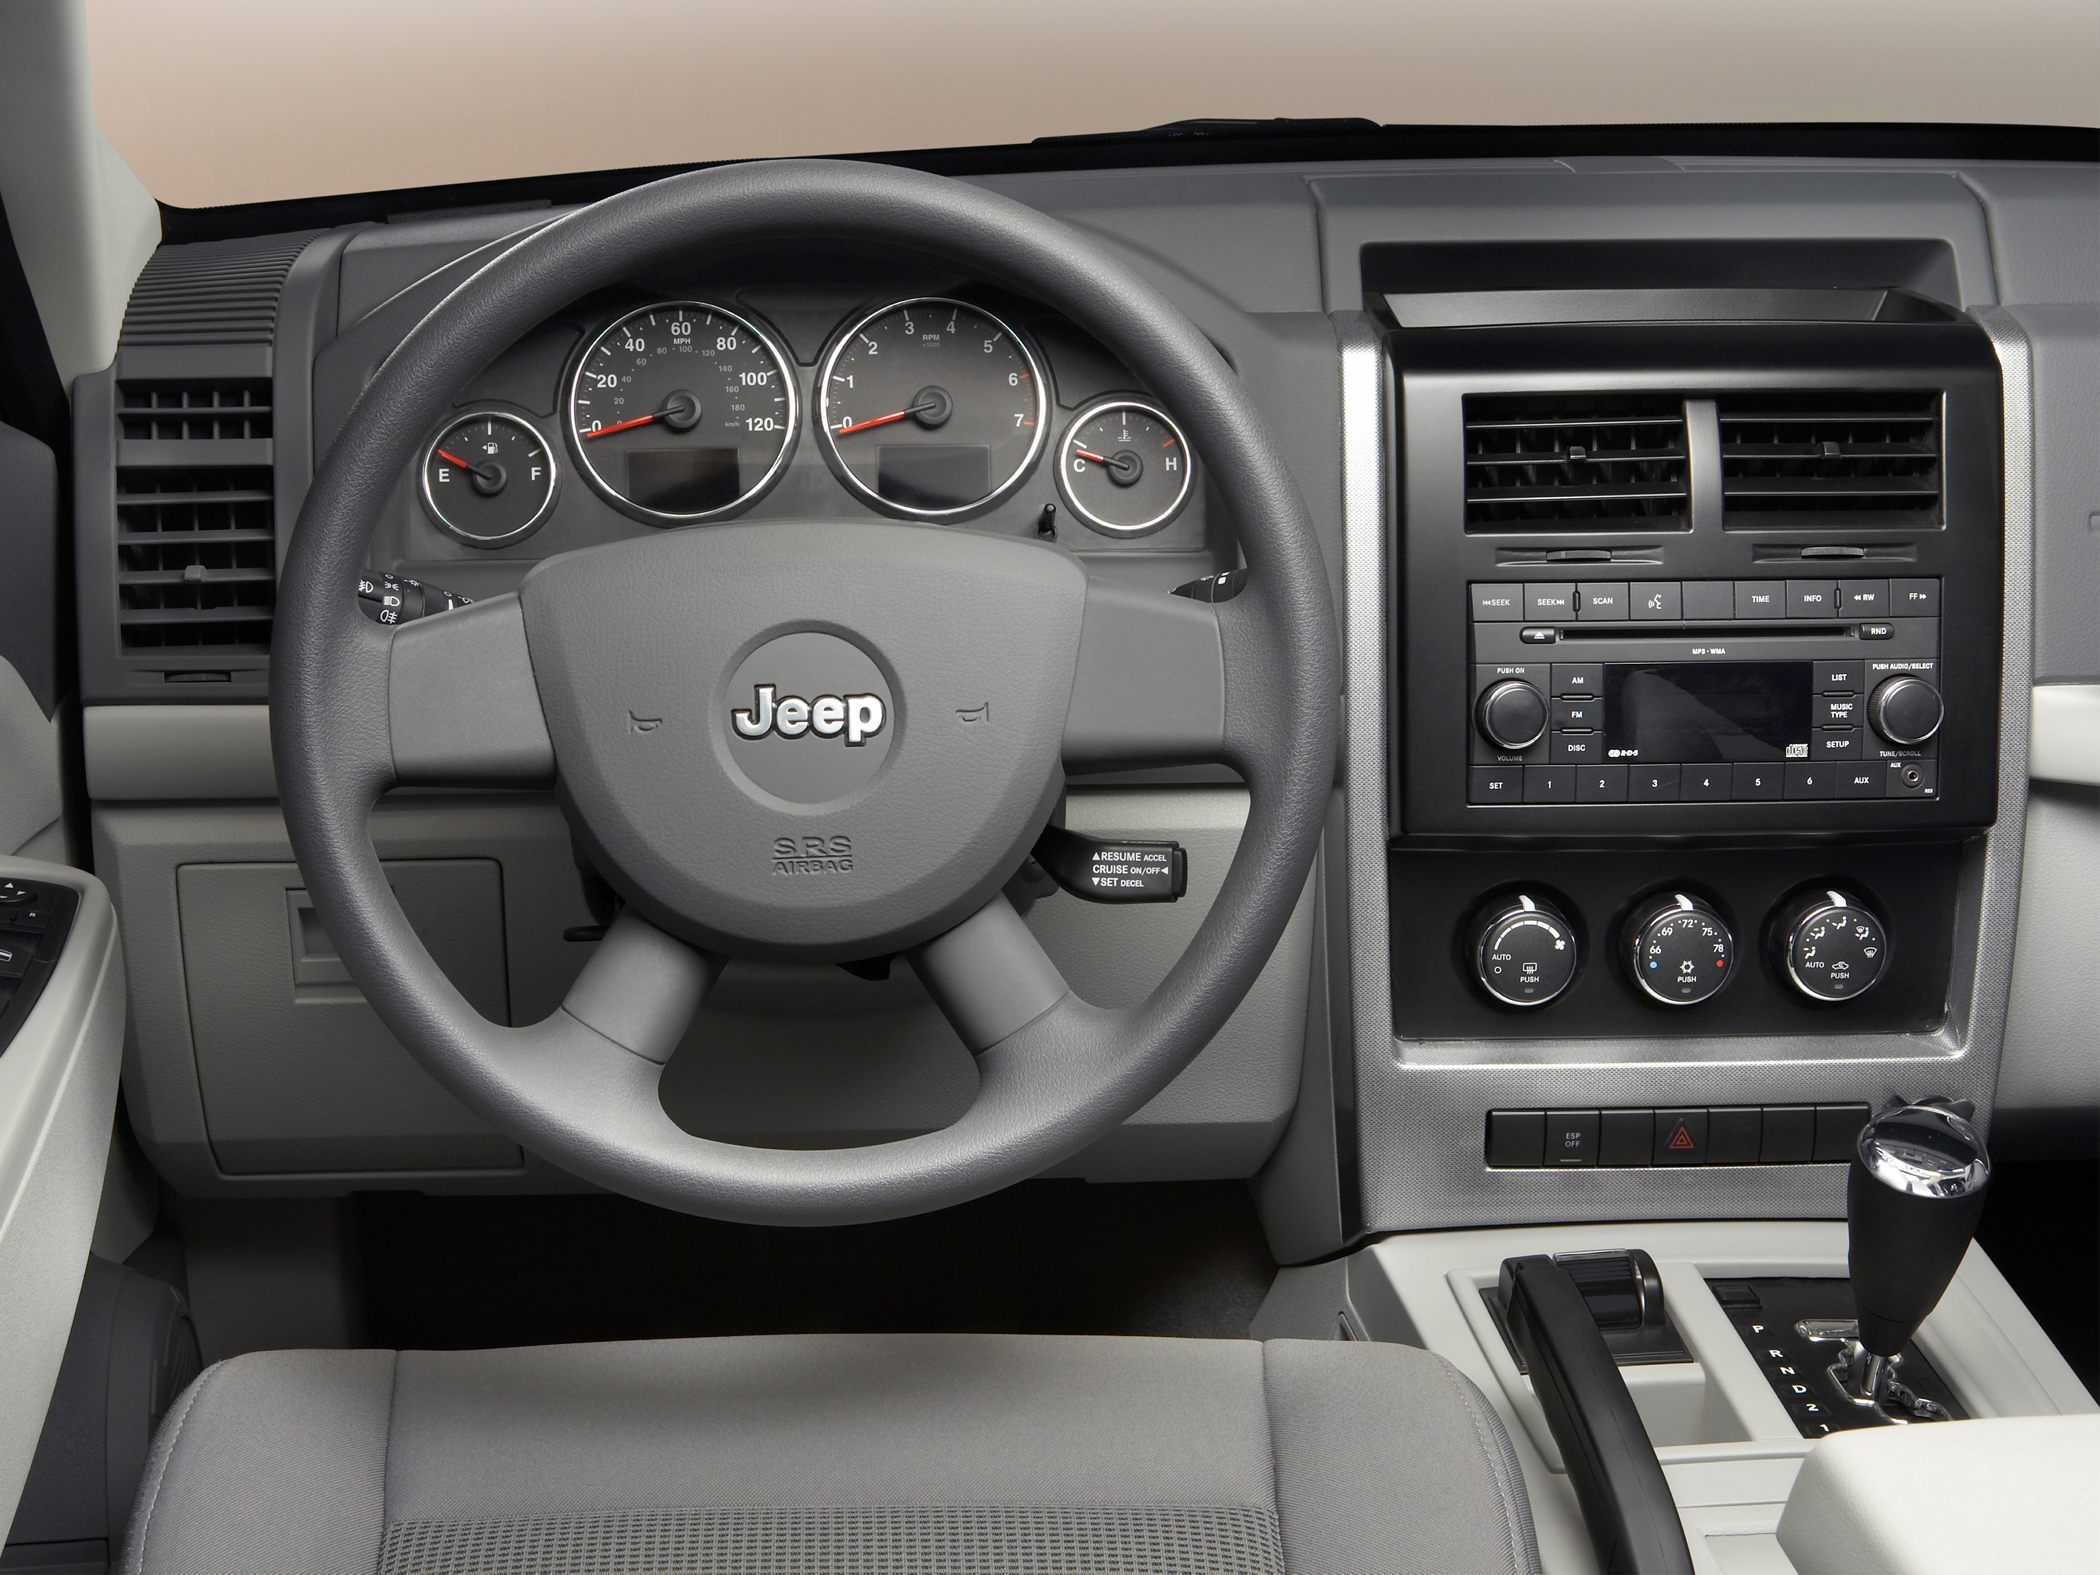 Jeep Storm Interior Picture 3 Reviews News Specs Buy Car